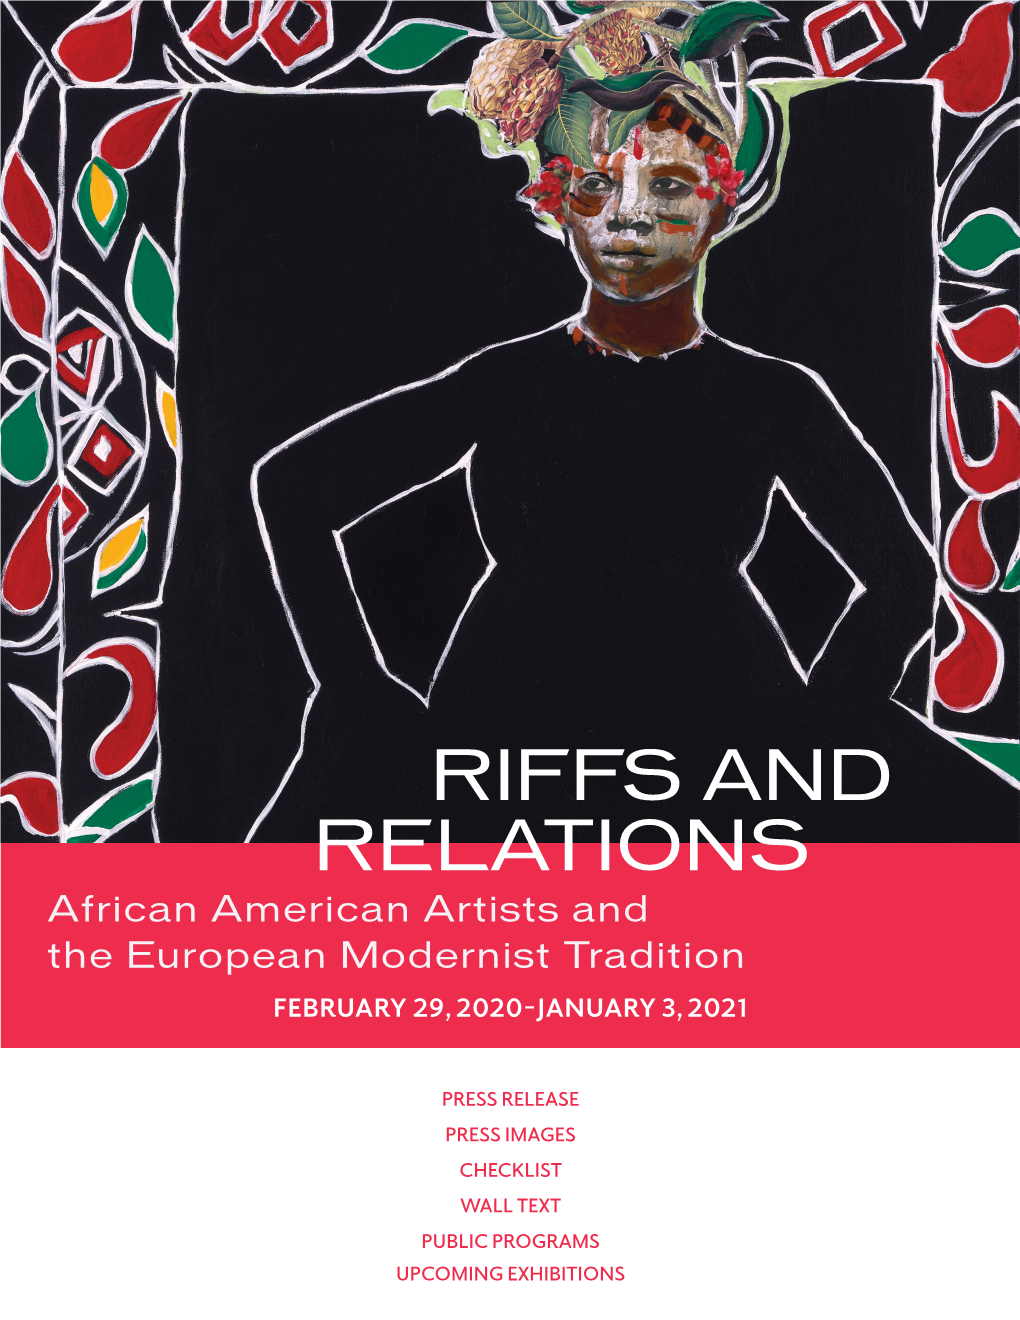 RIFFS and RELATIONS African American Artists and the European Modernist Tradition FEBRUARY 29, 2020-JANUARY 3, 2021